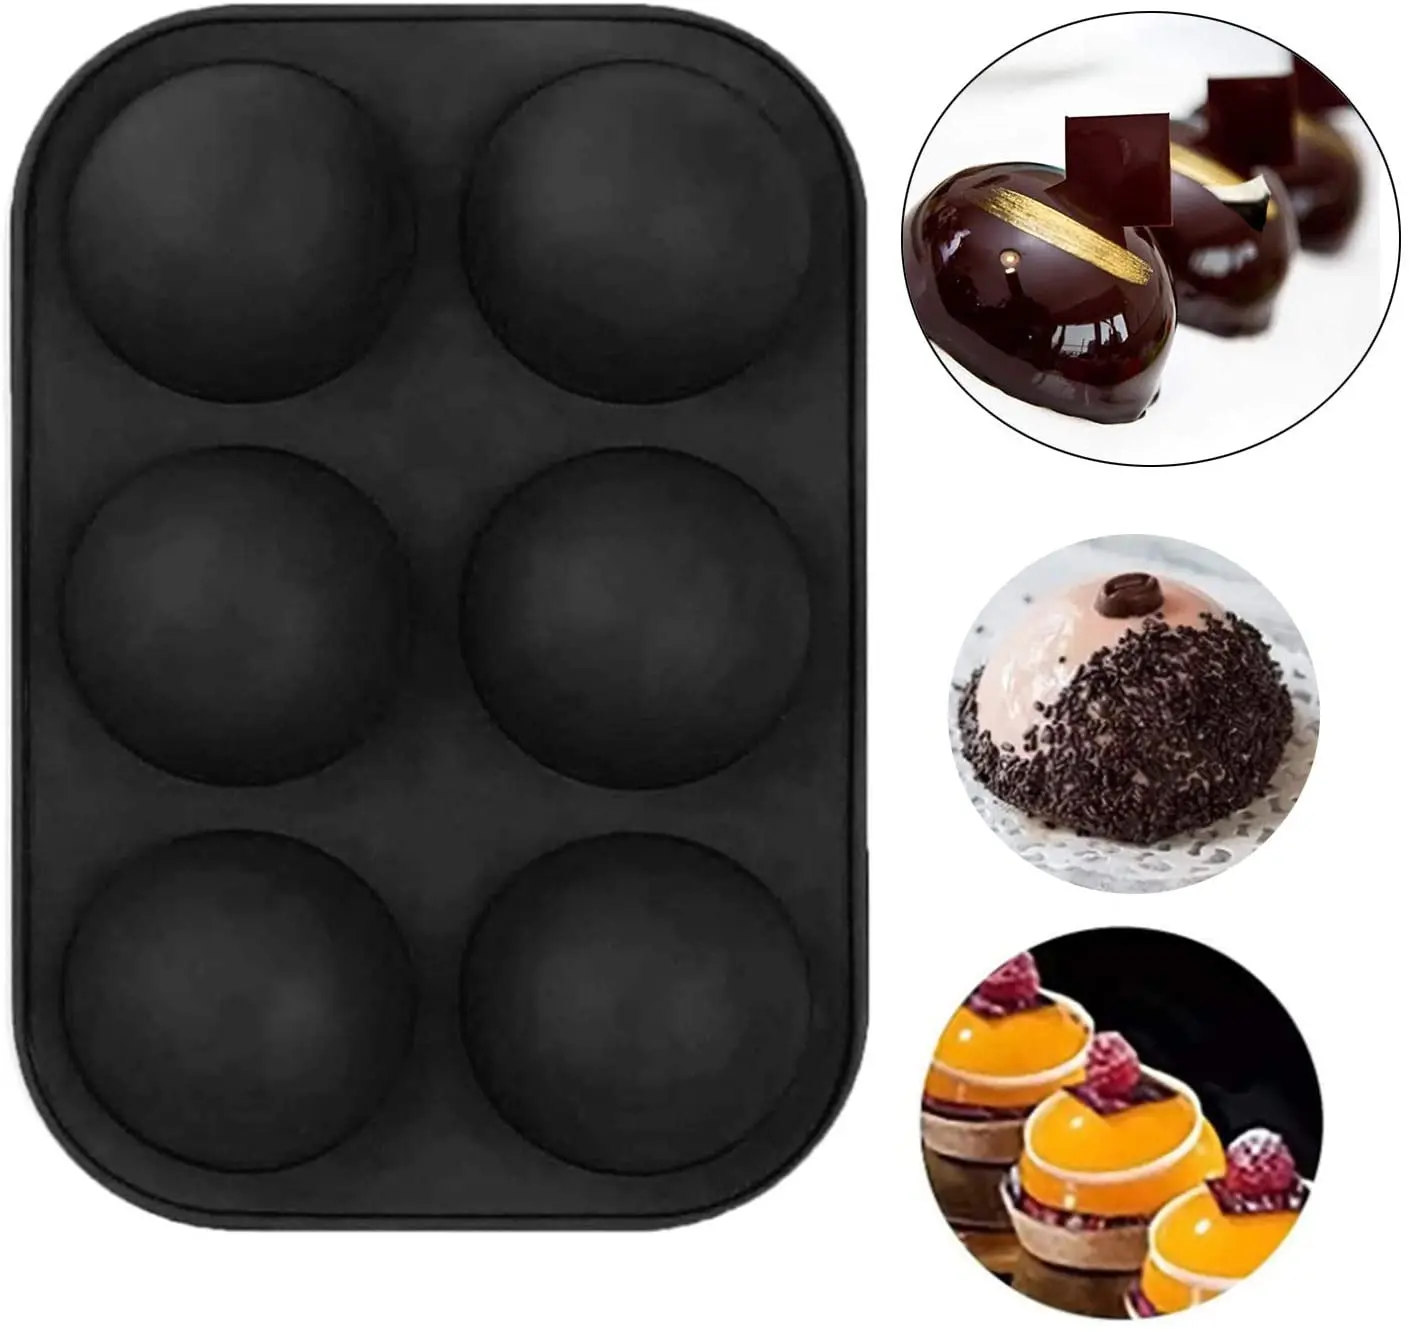 

6 Cavity Half Sphere Circle Silicone mold Chocolate Sphere Cake Mould Cocoa Bomb Decorative Mould Baking Tool DIY homemade